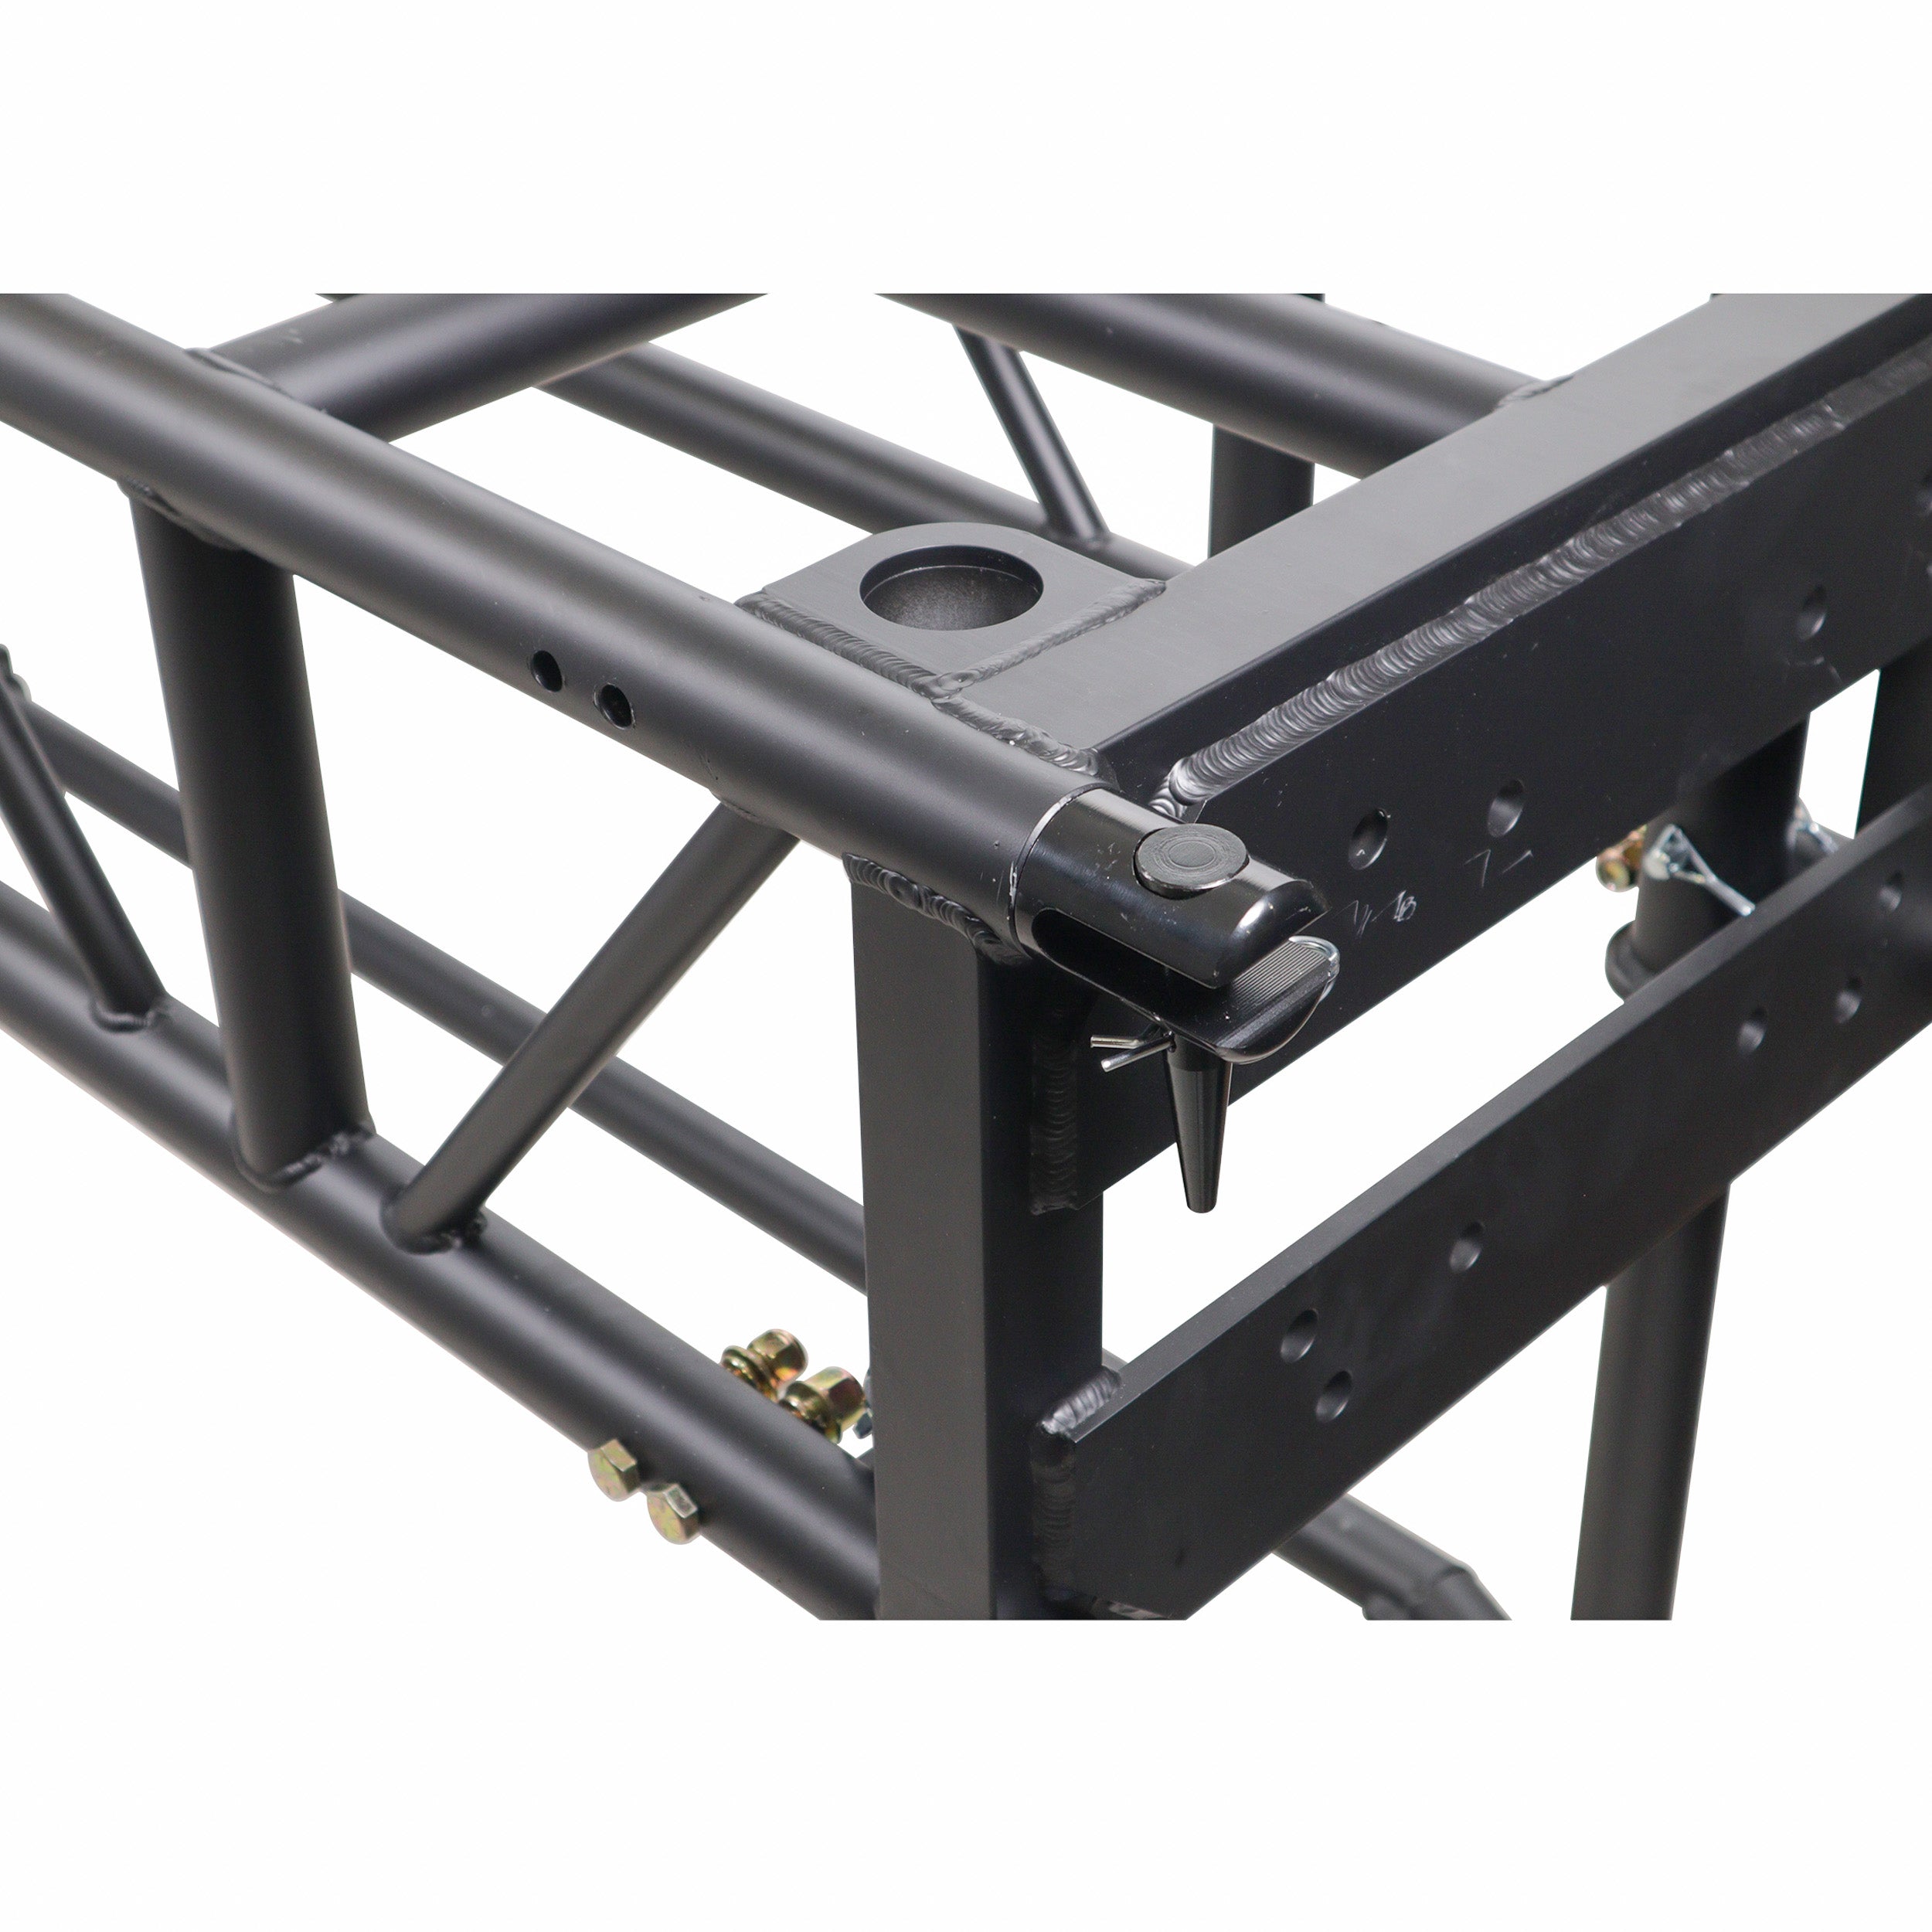 Pro X 10' FT Pre-Rig Truss Segment with Removable Rolling Base System BLACK XT-PRERIG10FTBLK